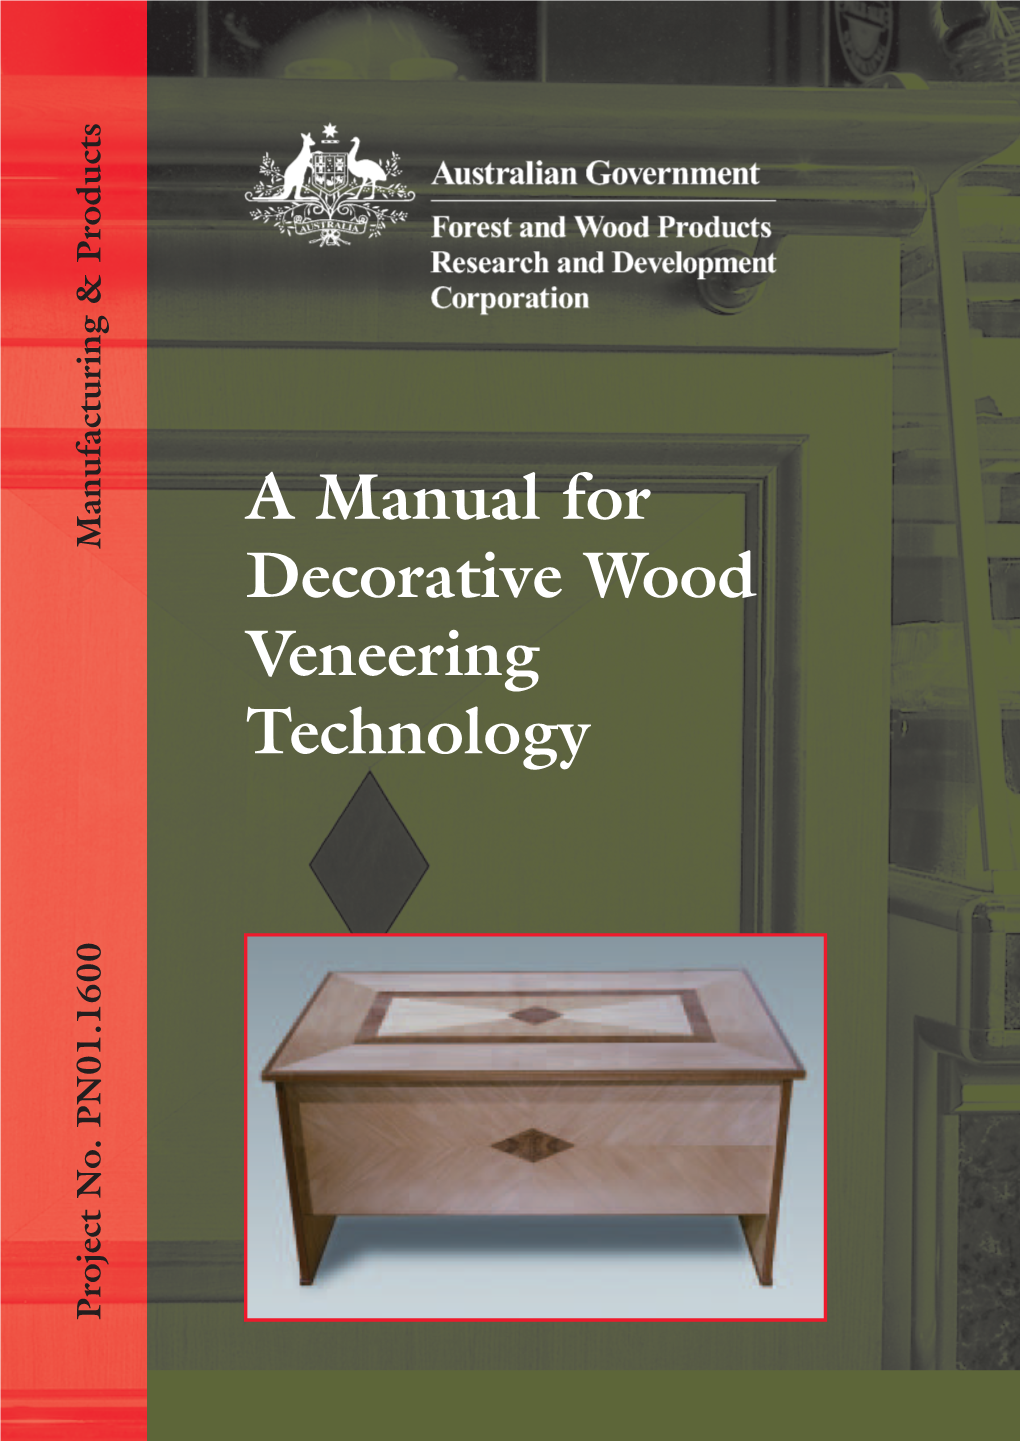 A Manual for Decorative Wood Veneering Technology